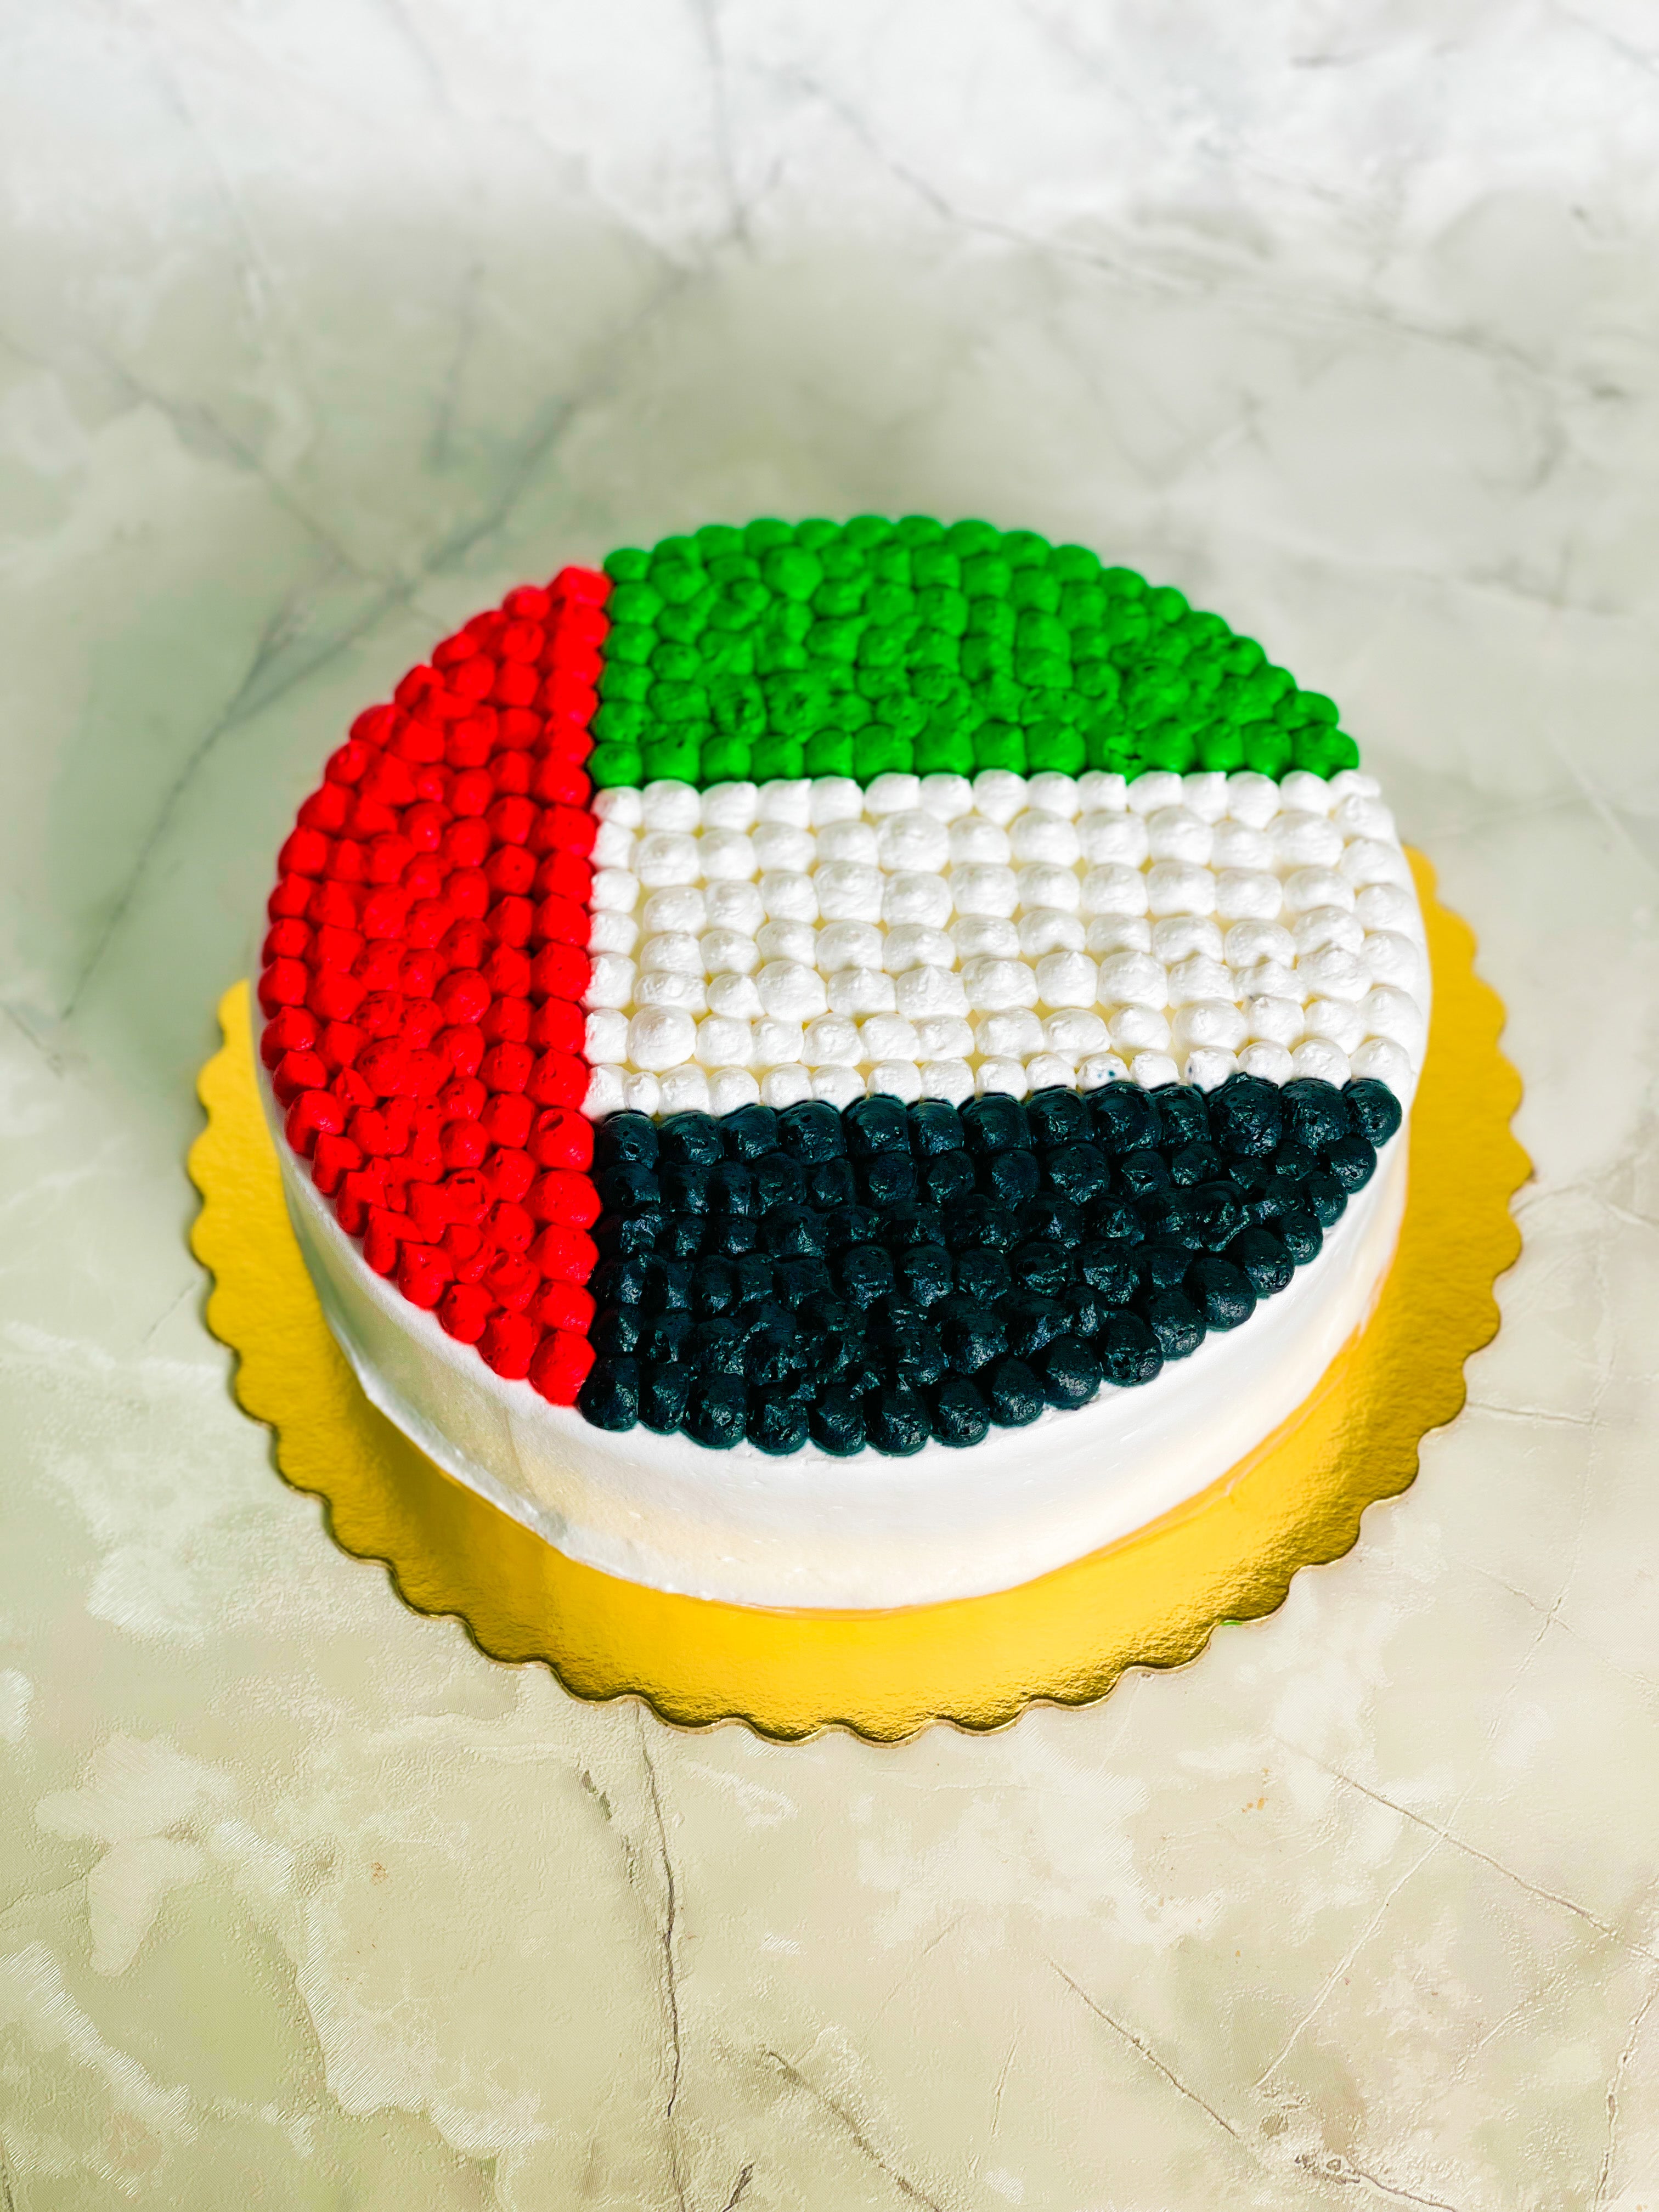 National Day Cake